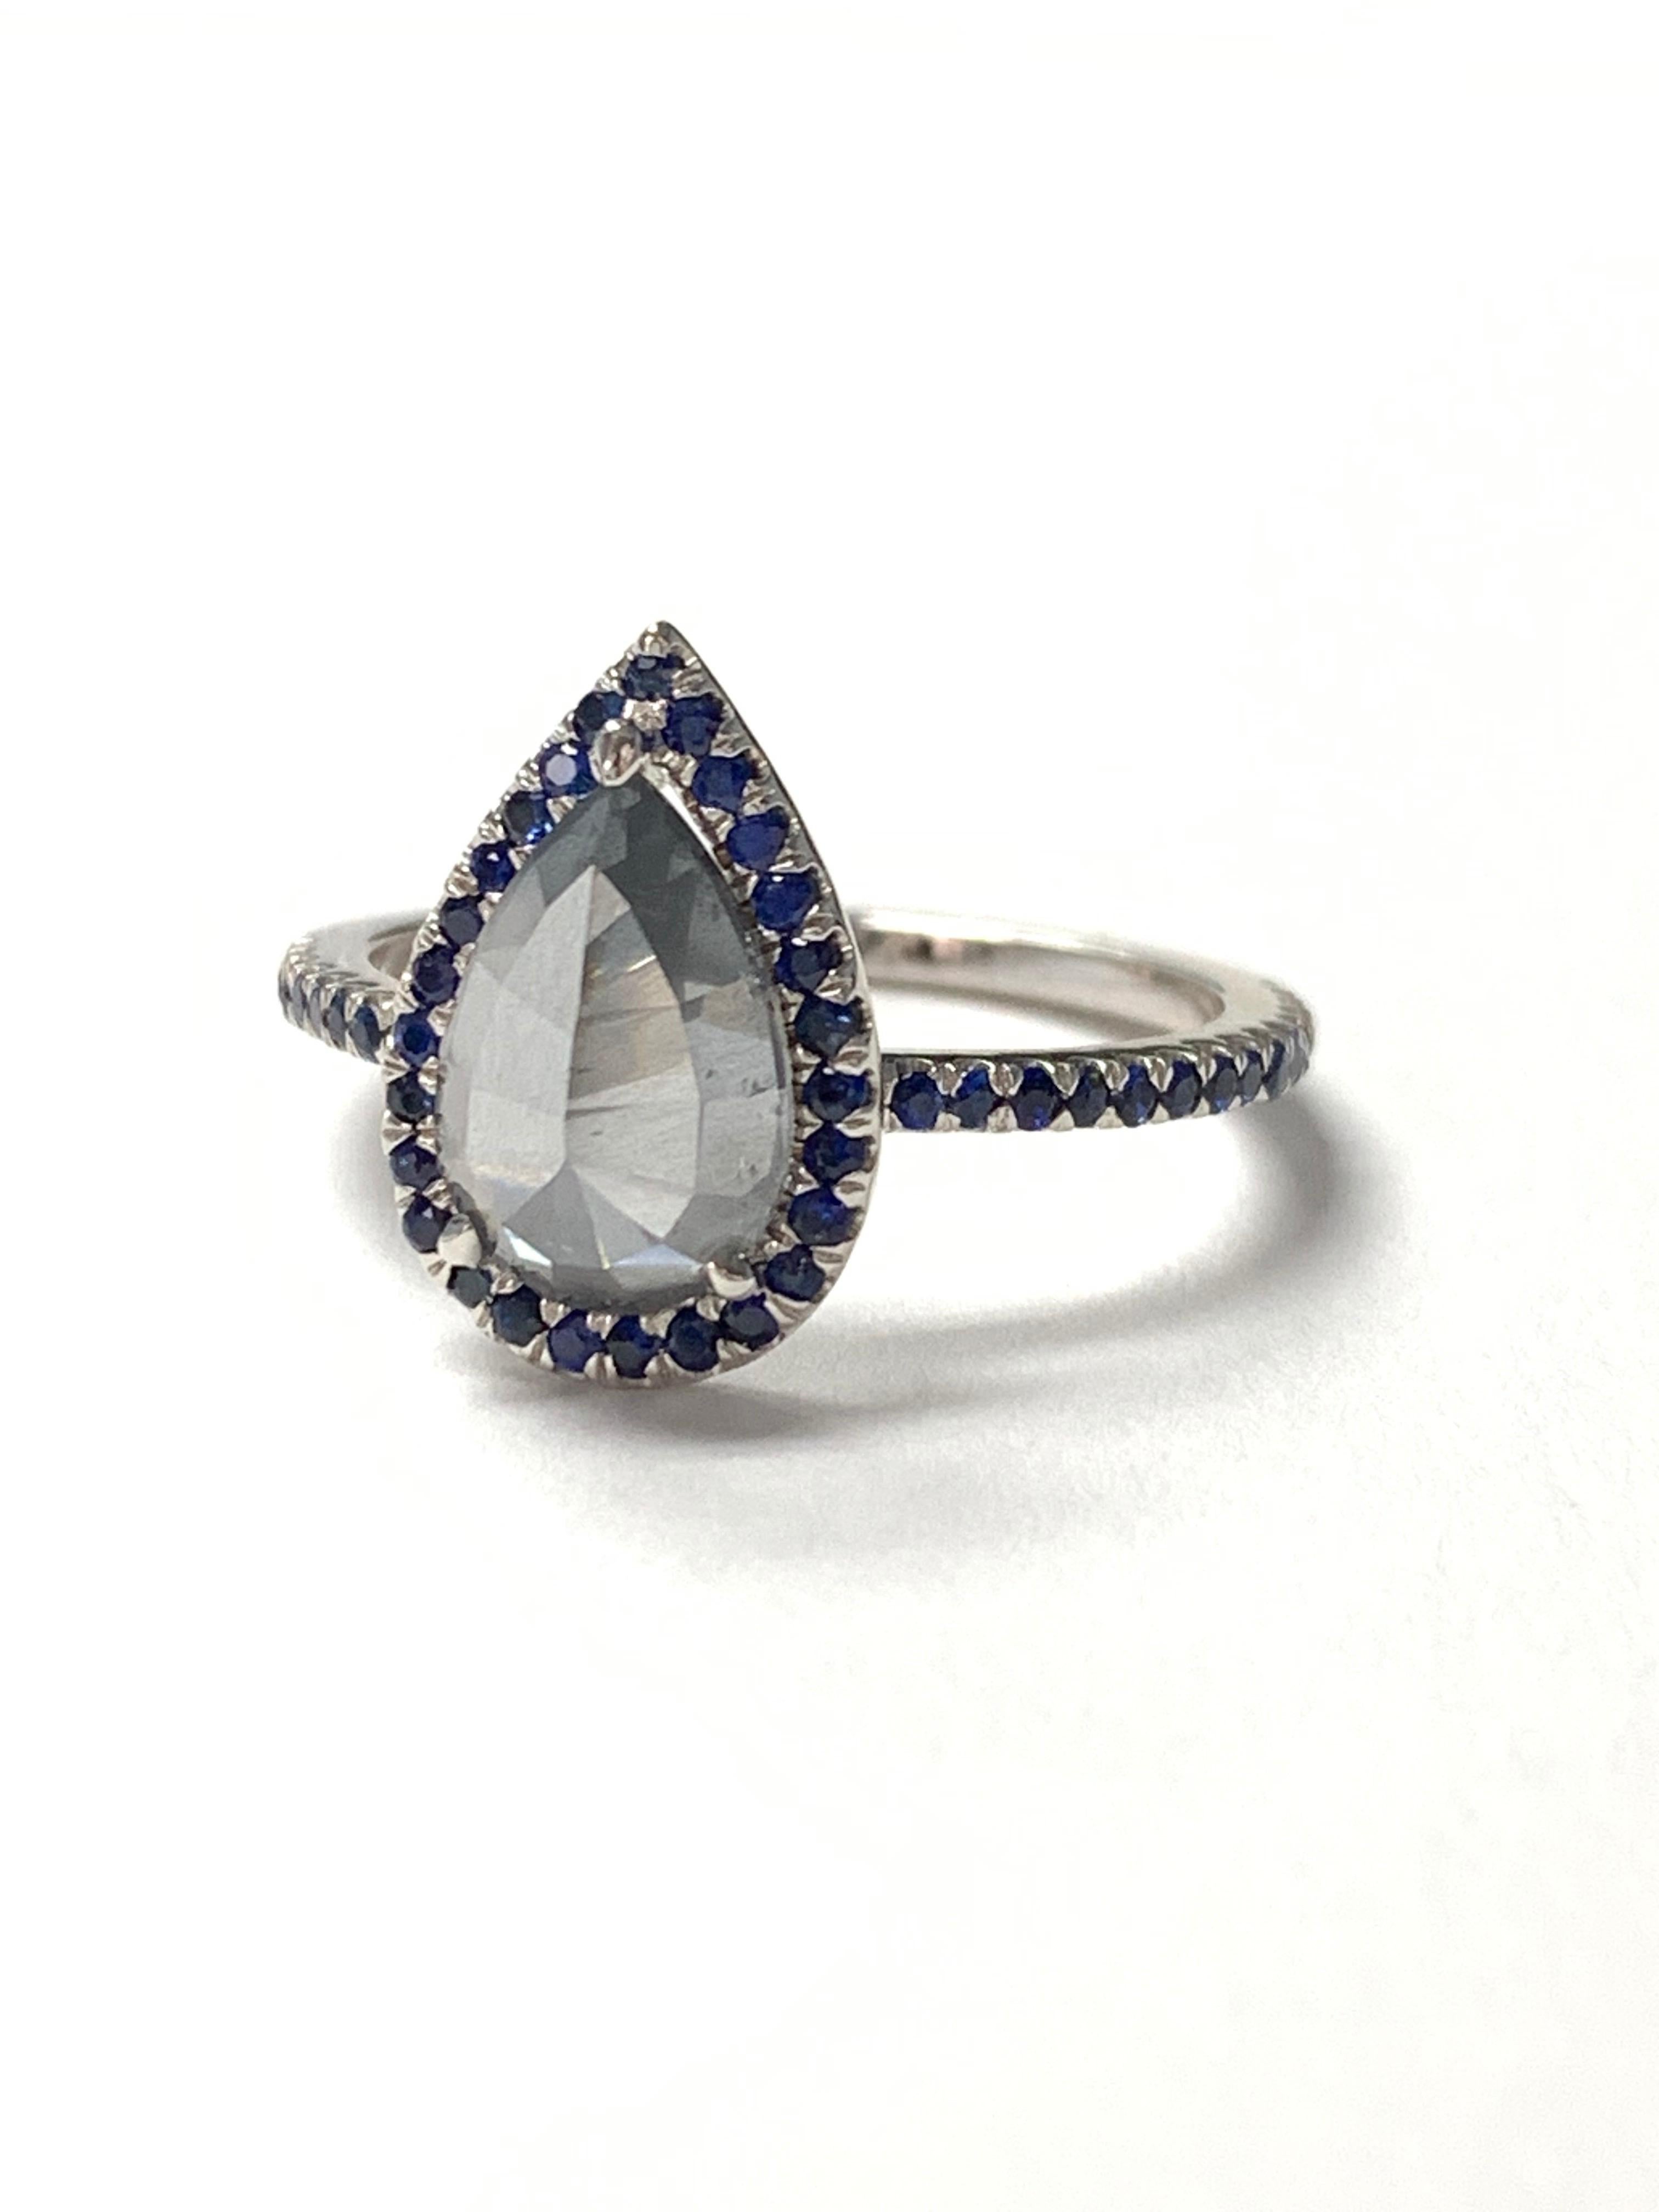 GIA Certified Fancy dark gray pear shape rose cut diamond and blue sapphire engagement ring hand crafted in 18 k gold. 
The details are as follows : 
Fancy dark gray pear shape rose cut diamond weight : 1.89 carat 
Blue sapphire weight : 0.55 carat